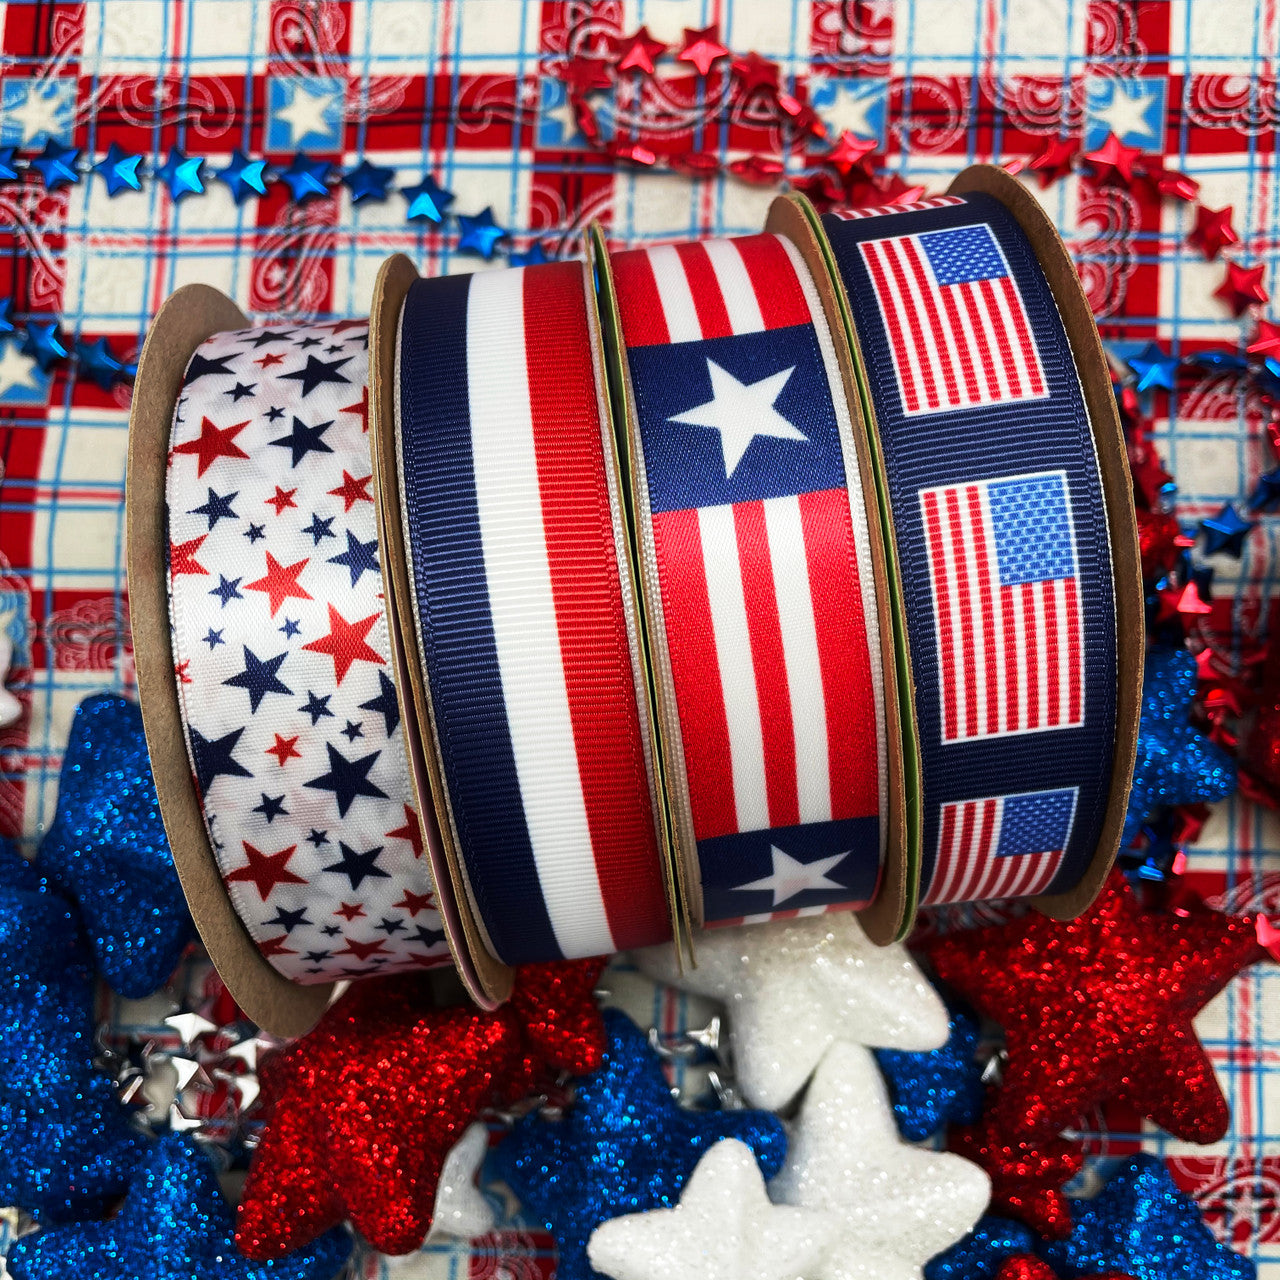 Mix and match all our patriotic ribbons for the ideal red white and blue American celebrations!